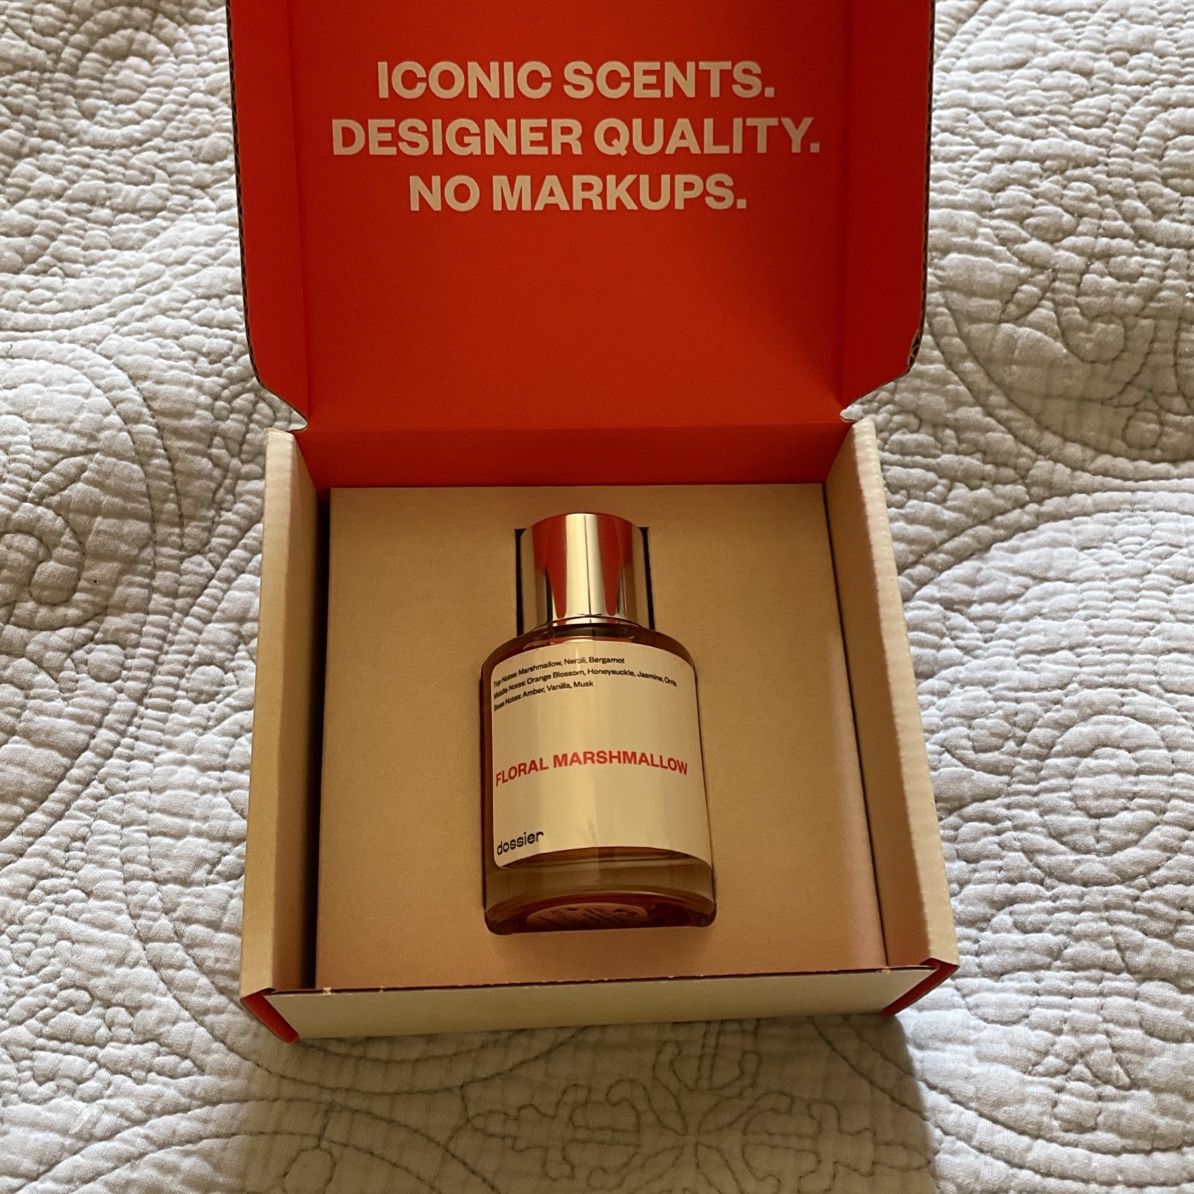 NEW Dossier Perfume (Floral Grapefruit / Chanel dupe) for Sale in San  Francisco, CA - OfferUp